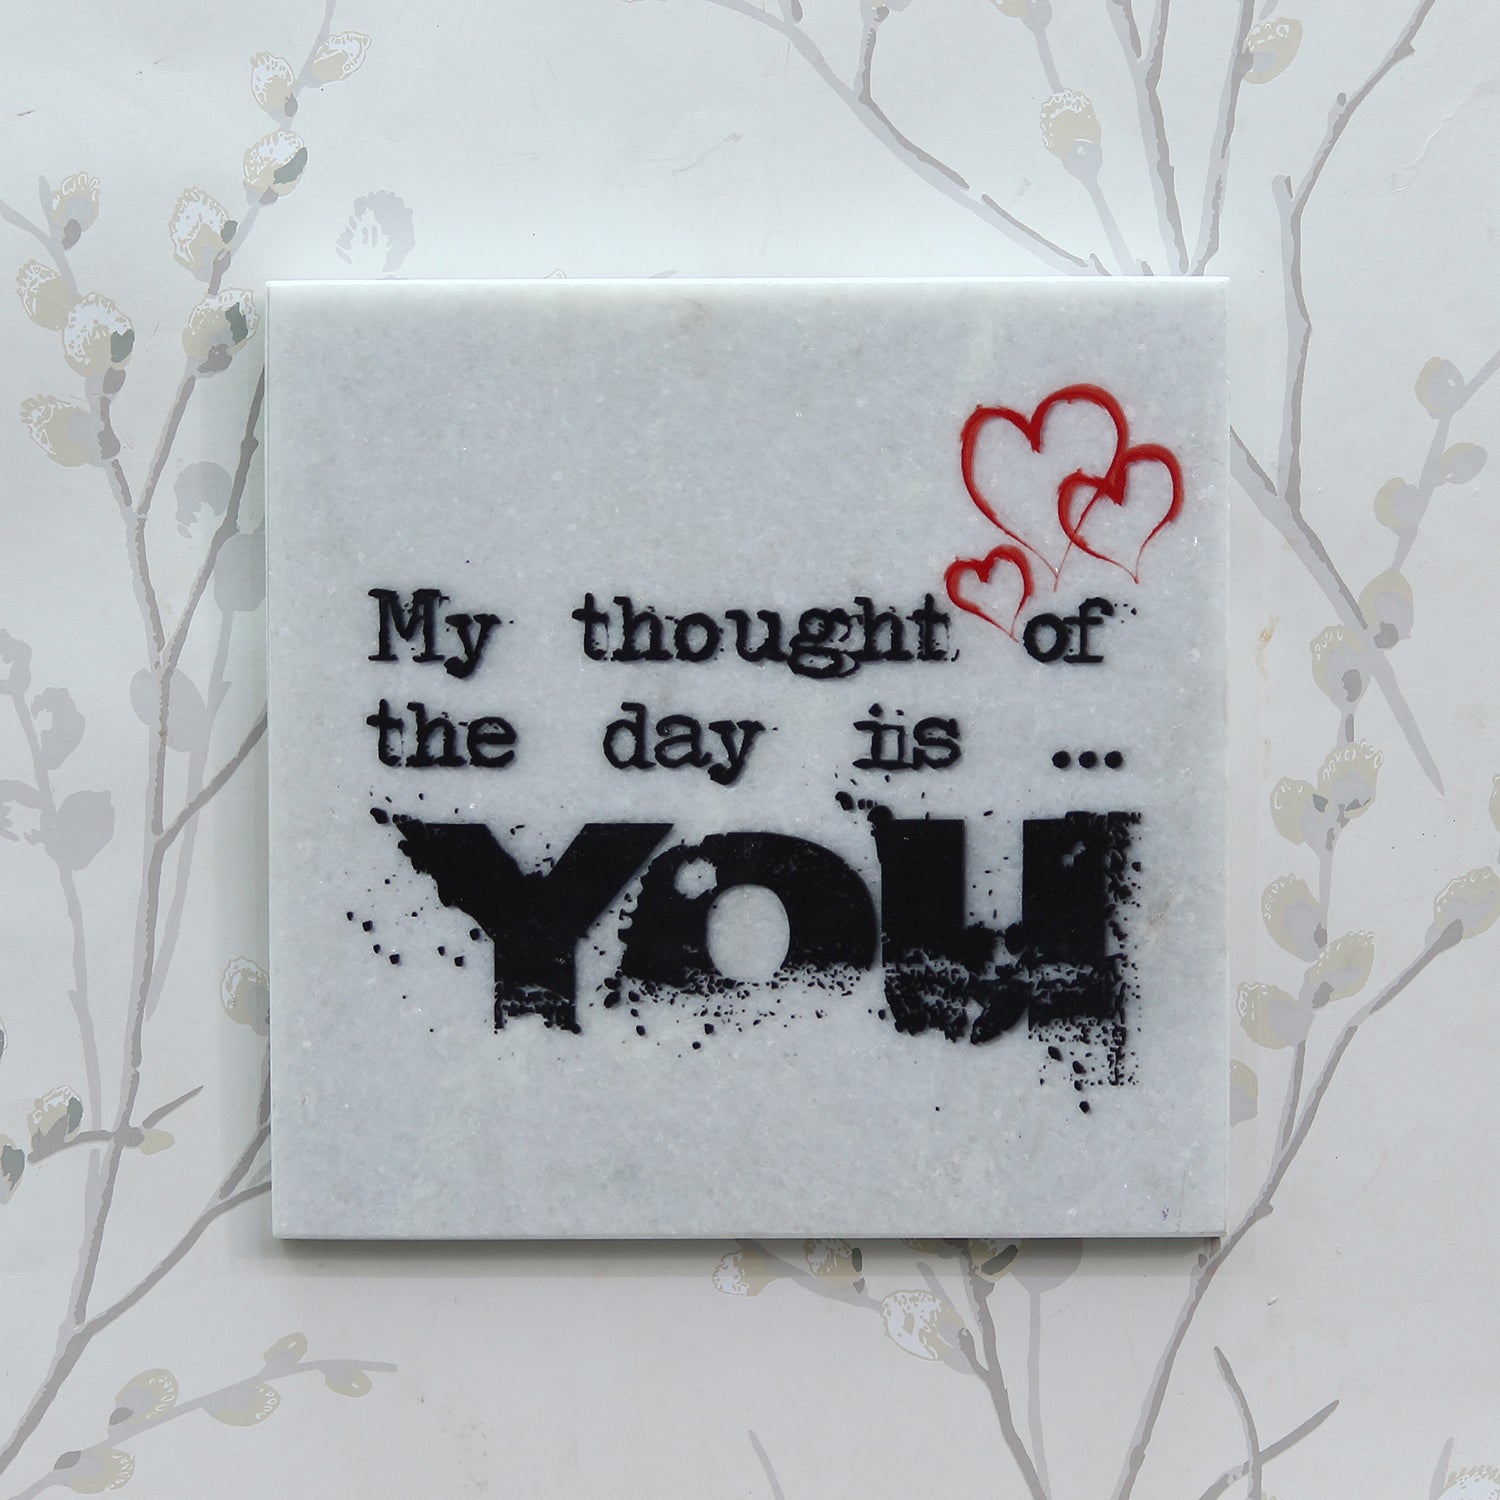 "My thought of the day is YOU" Quotation Painting On Marble Square Tile